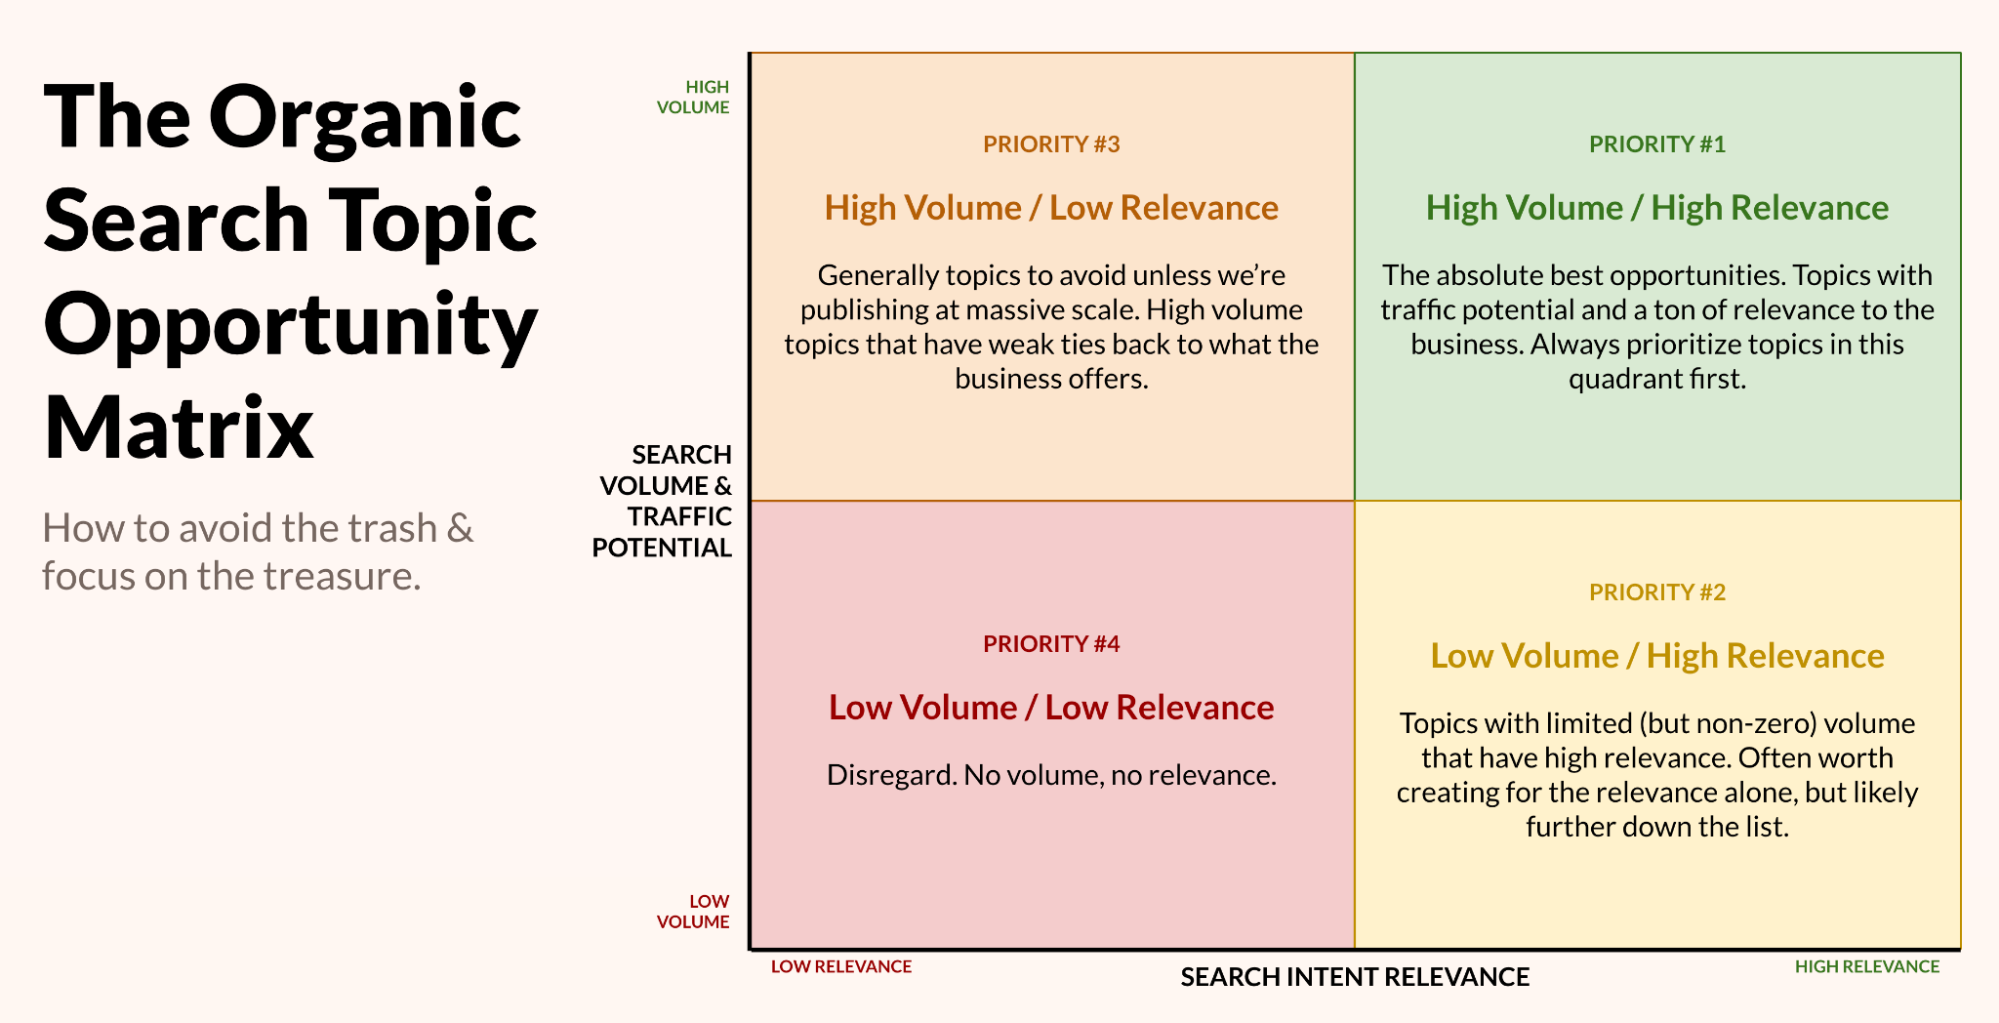 The organic search topic opportunity matrix measures search intent relevance and search volume and traffic potential in 4 quadrants